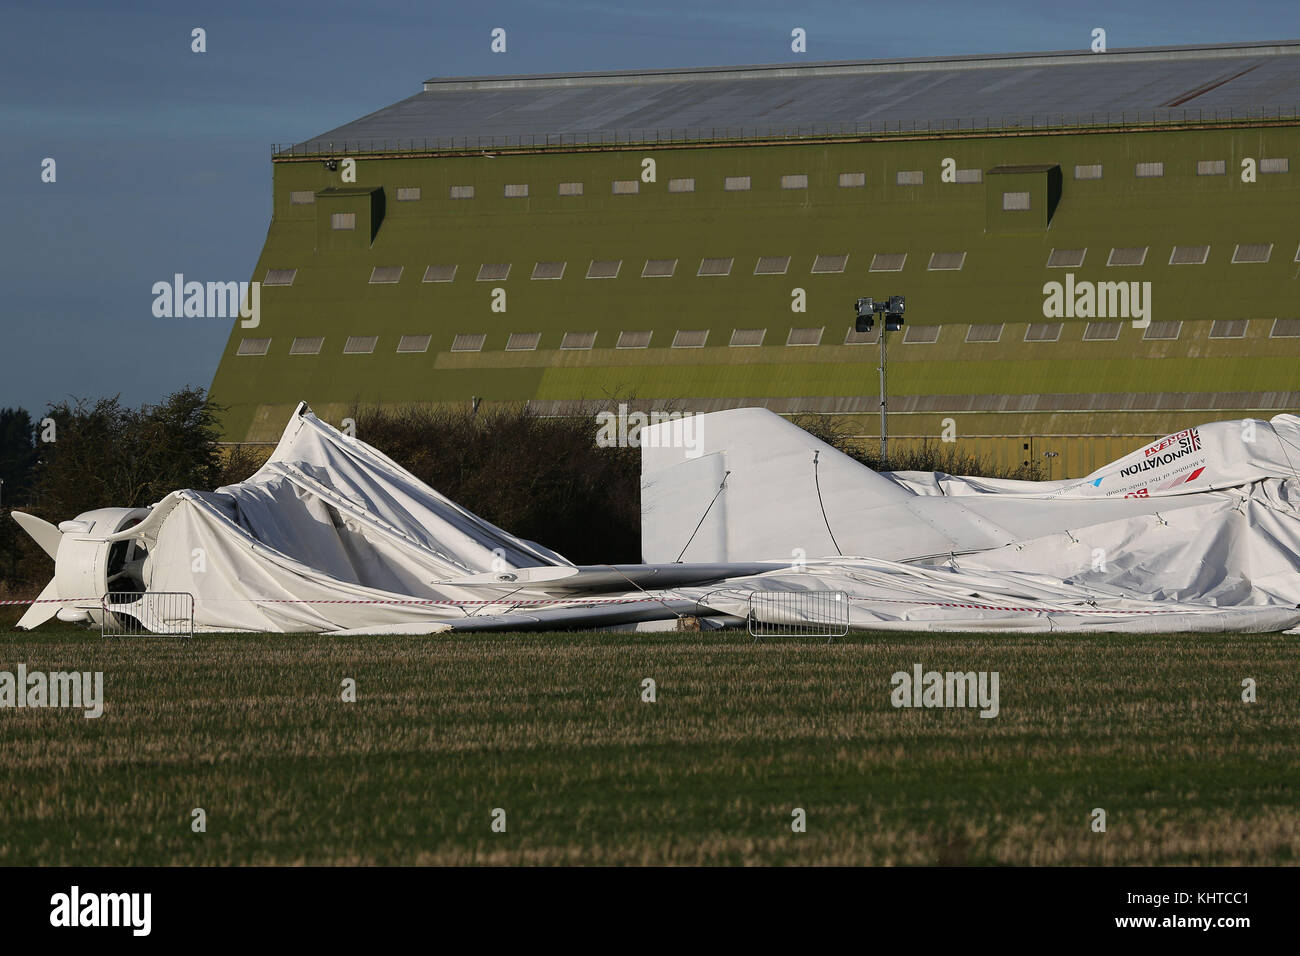 Airlander 10, the world's largest aircraft, lies on the ground at Cardington airfield in Bedfordshire, after the aircraft came loose from its moorings causing its hull to rip and deflate. Stock Photo